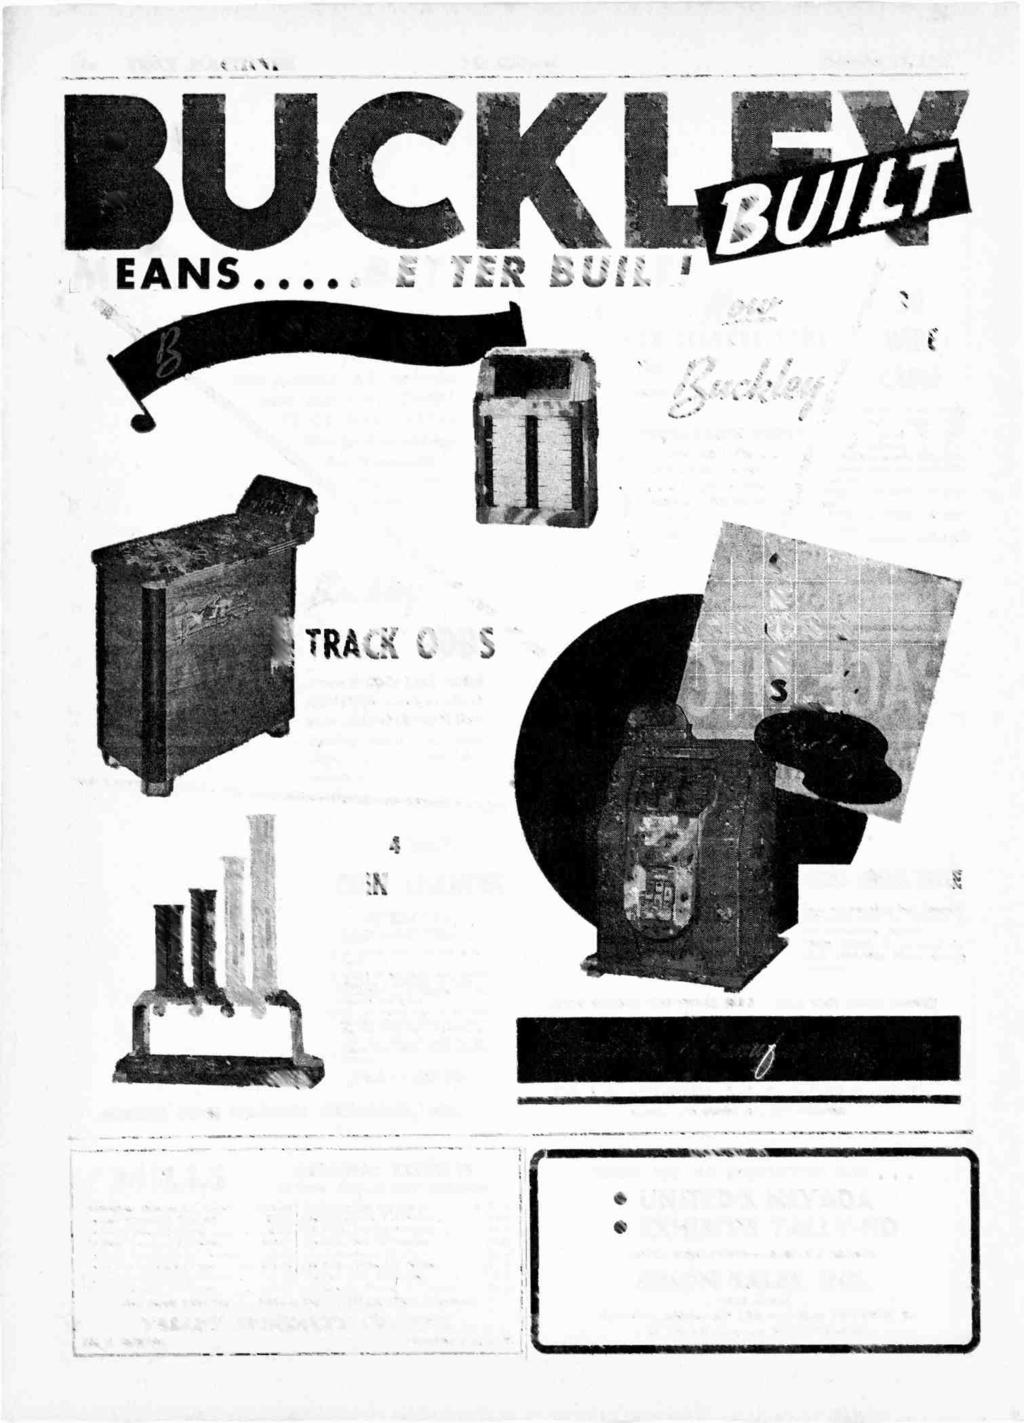 124 COIN MACHINES The Billboard November 15, 1947 MEANS...BETTER BUILT! Hatr 30 FOR CLEARER TONE WIRE First practical and profitable music box at the LOWEST PRICE!